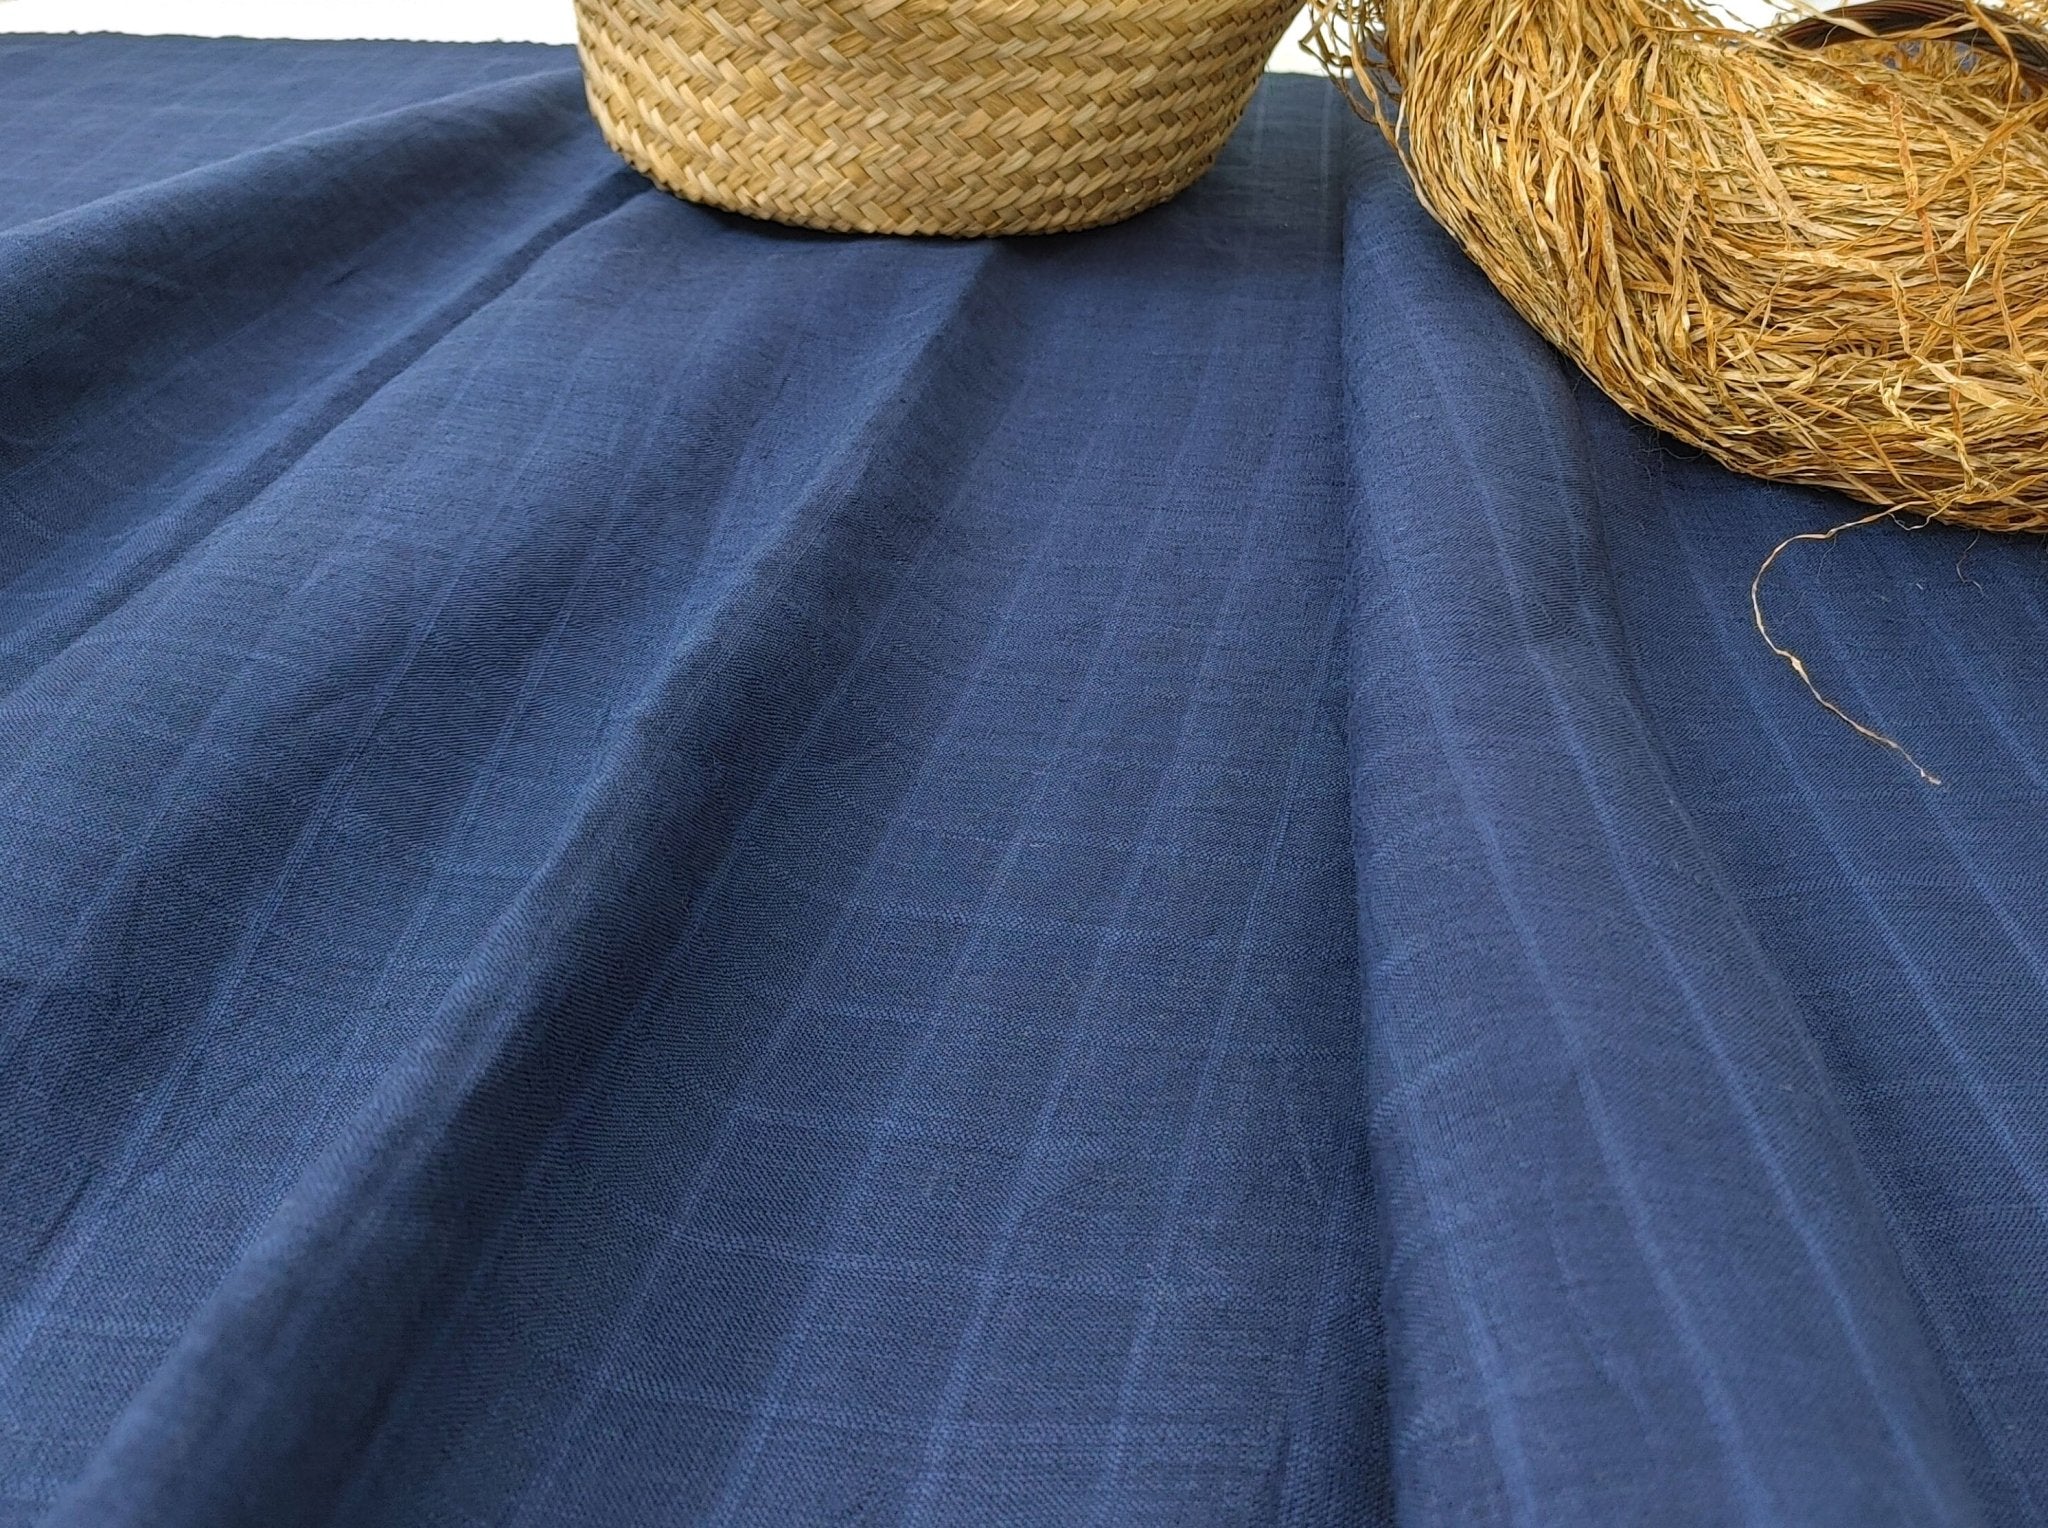 100% Linen Navy Color Fabric with Subtle Windowpane 4743 - The Linen Lab - Navy